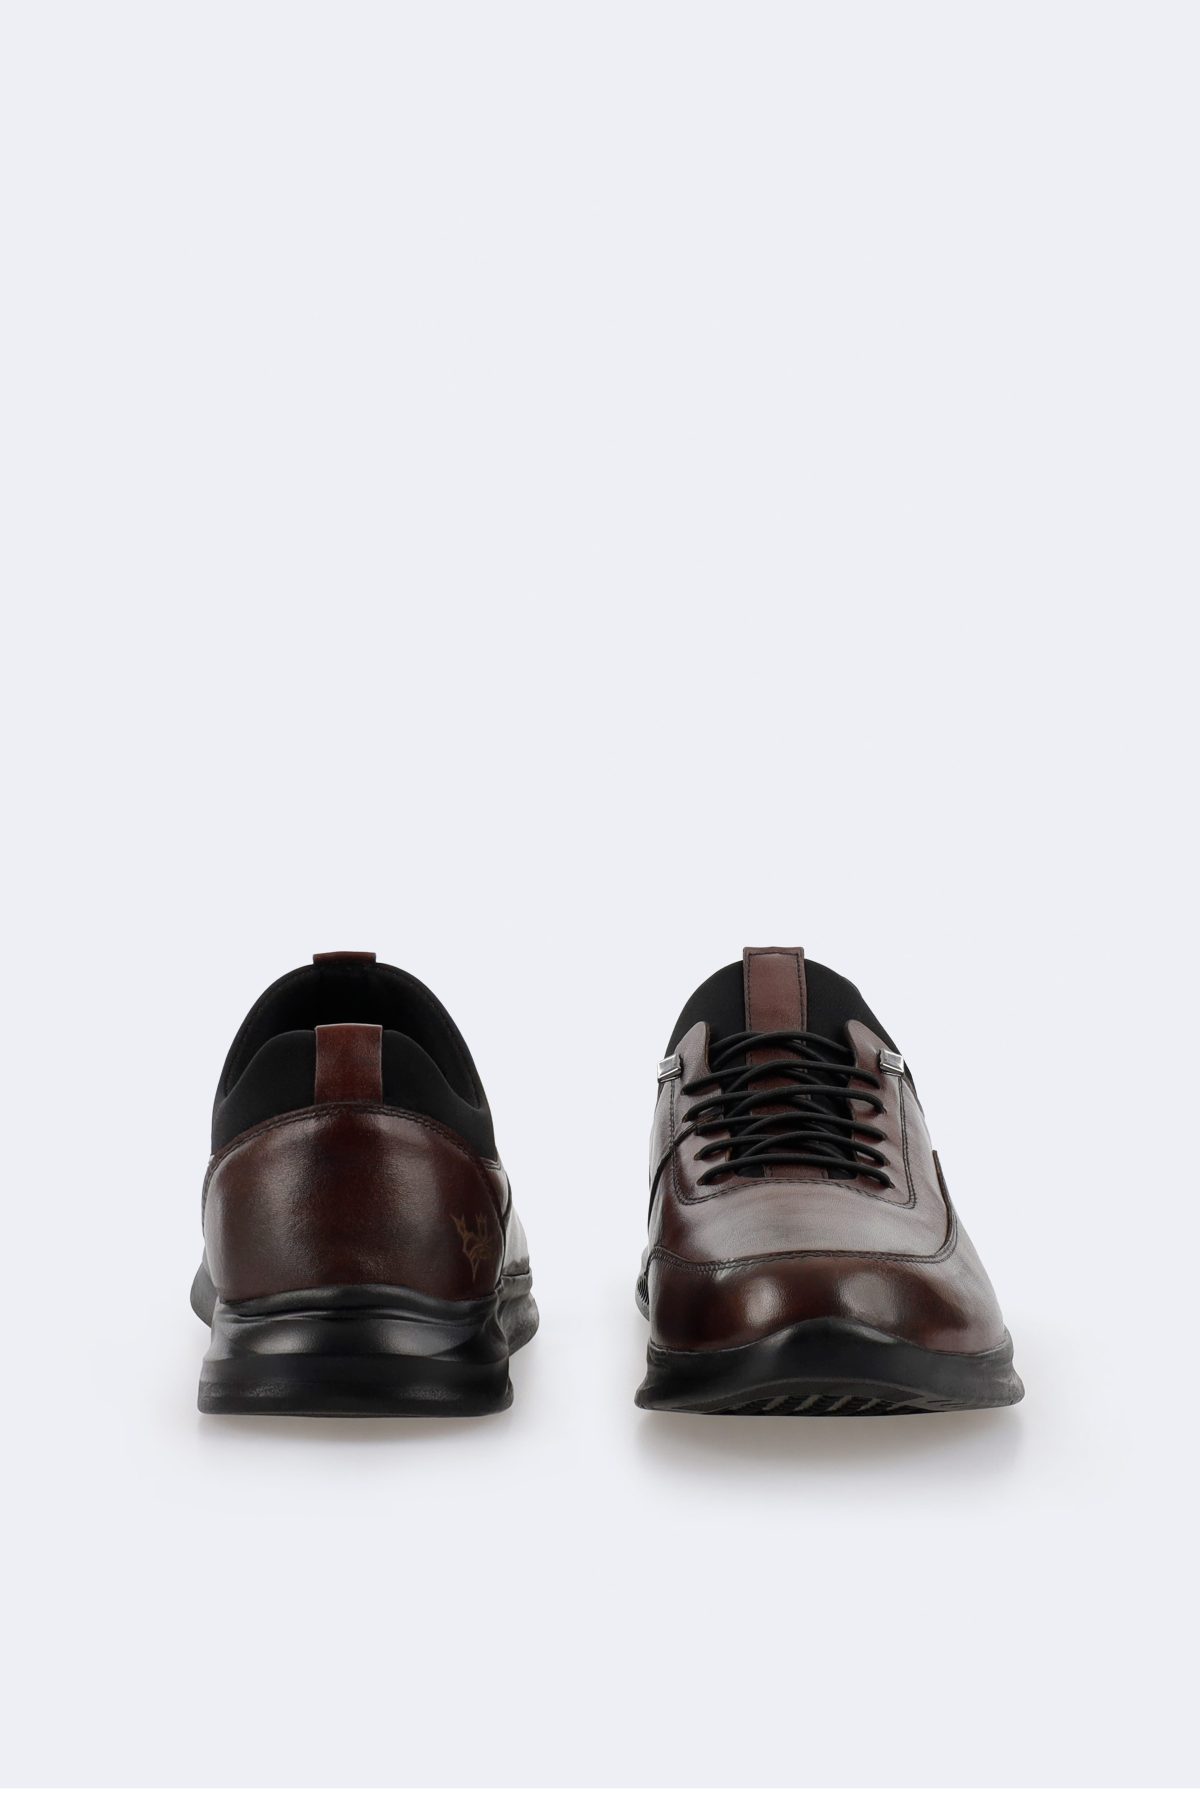 Classic casual leather shoes-4719